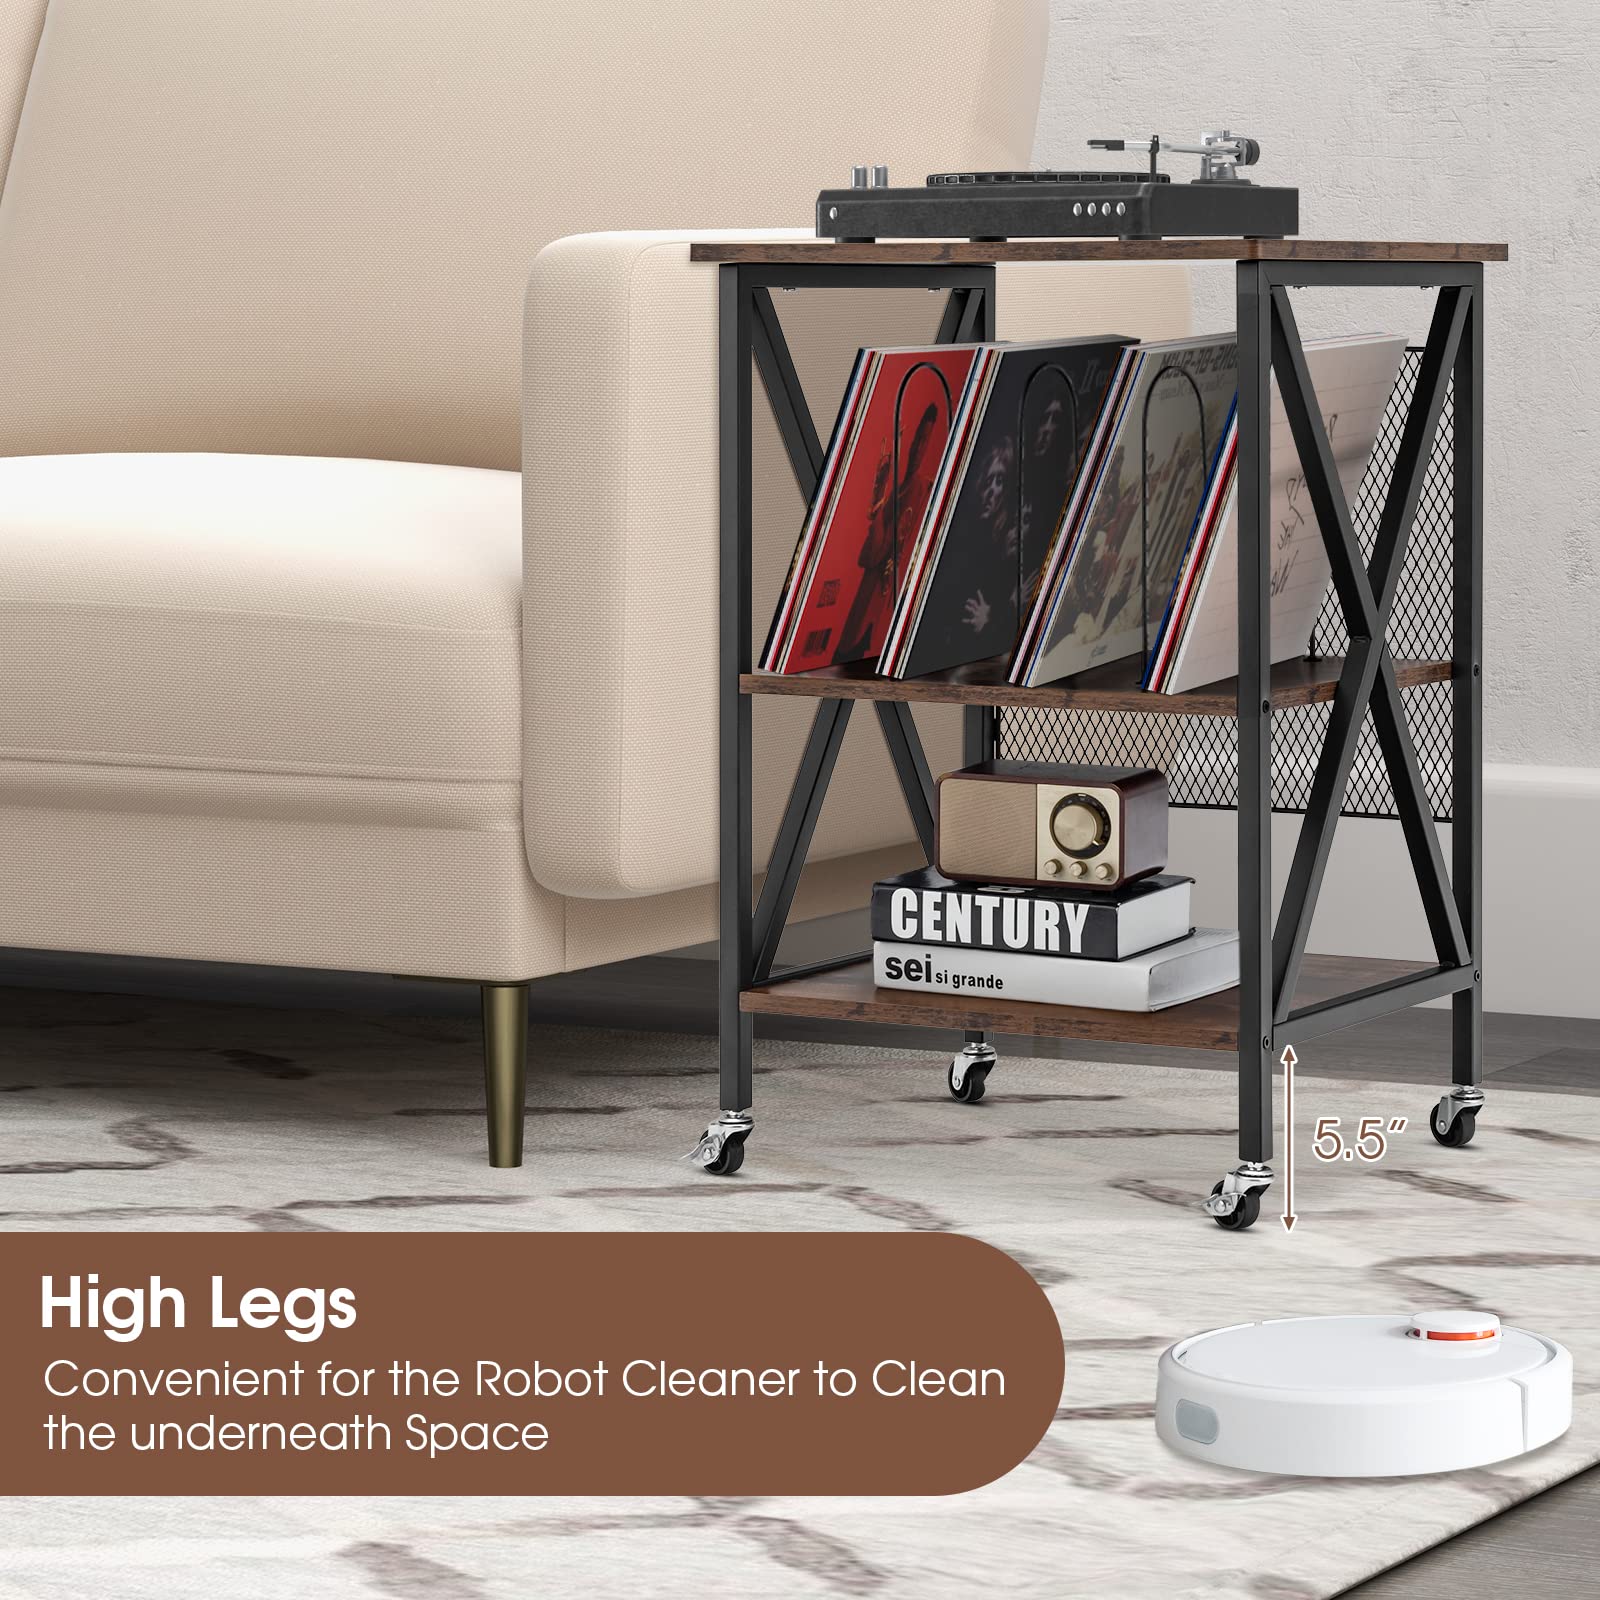 Giantex Record Player Stand, Vinyl Record Storage Table w/ 3 M-shaped Dividers & 4 Rolling Wheels, Rustic Brown